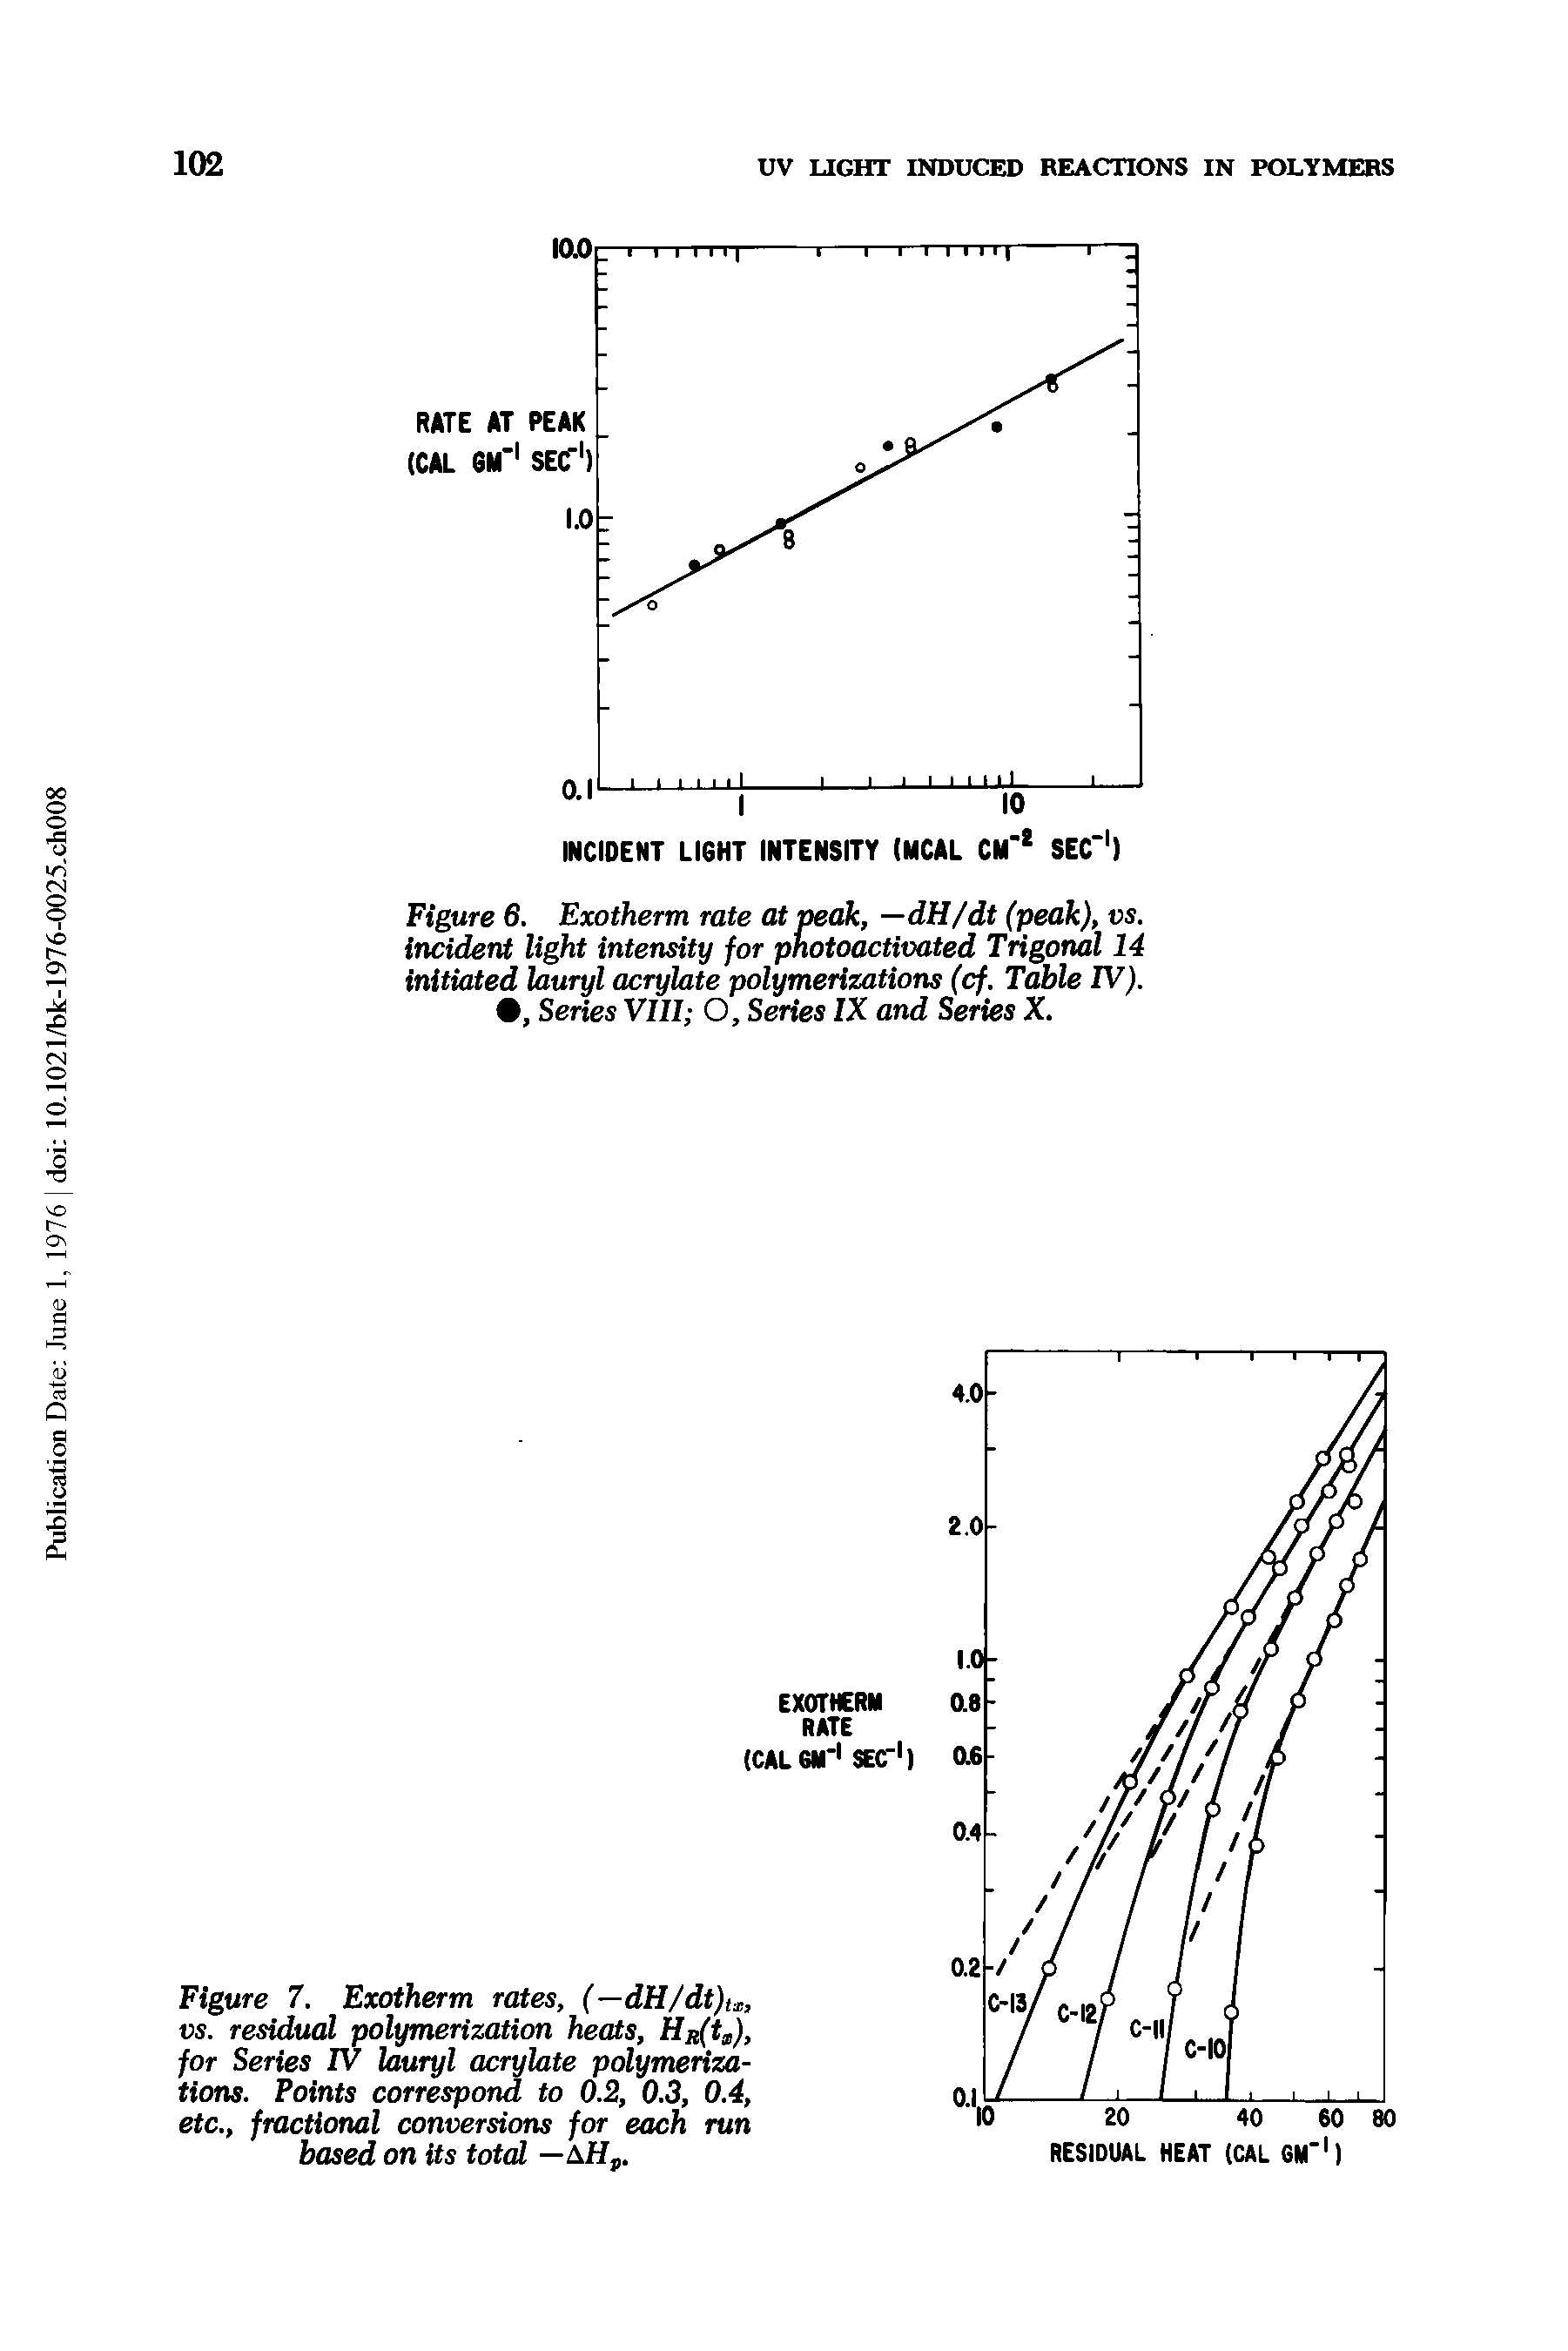 Figure 6. Exotherm rate at peak, —dH/dt (peak), vs. irwident light intensity for photoactivated Trigonal 14 initiated lauryl acrylate polymerizatiorts (cf. Table IV). , Series VIII O, Series IX and Series X.